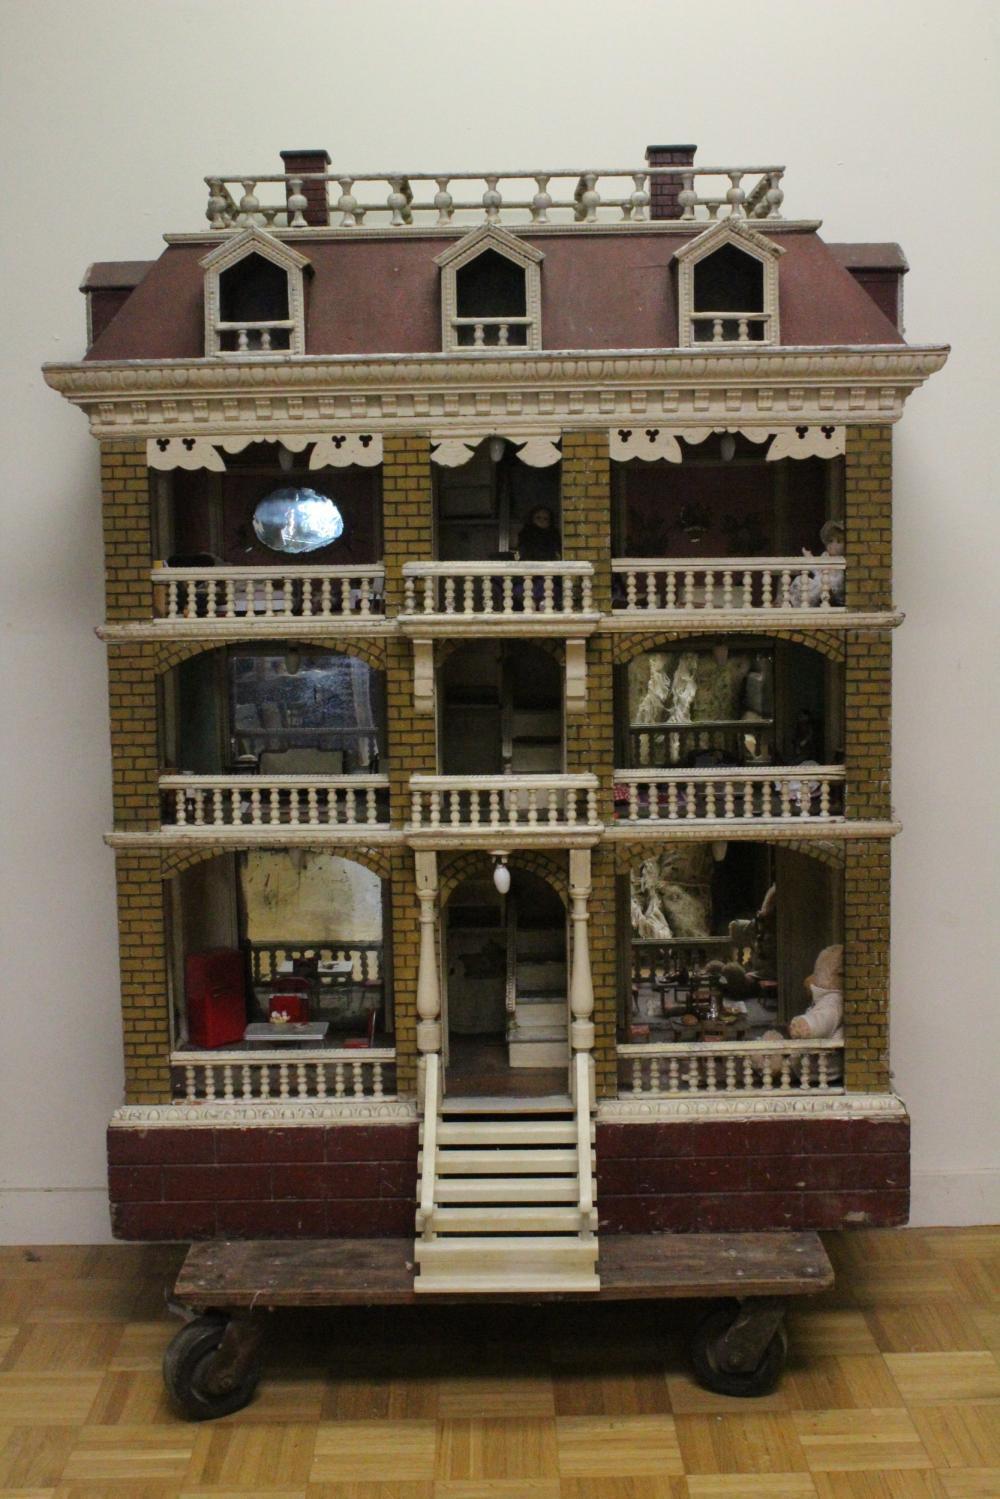 WELL DETAILED ANTIQUE TOWN HOUSE DOLLHOUSE Lot 1